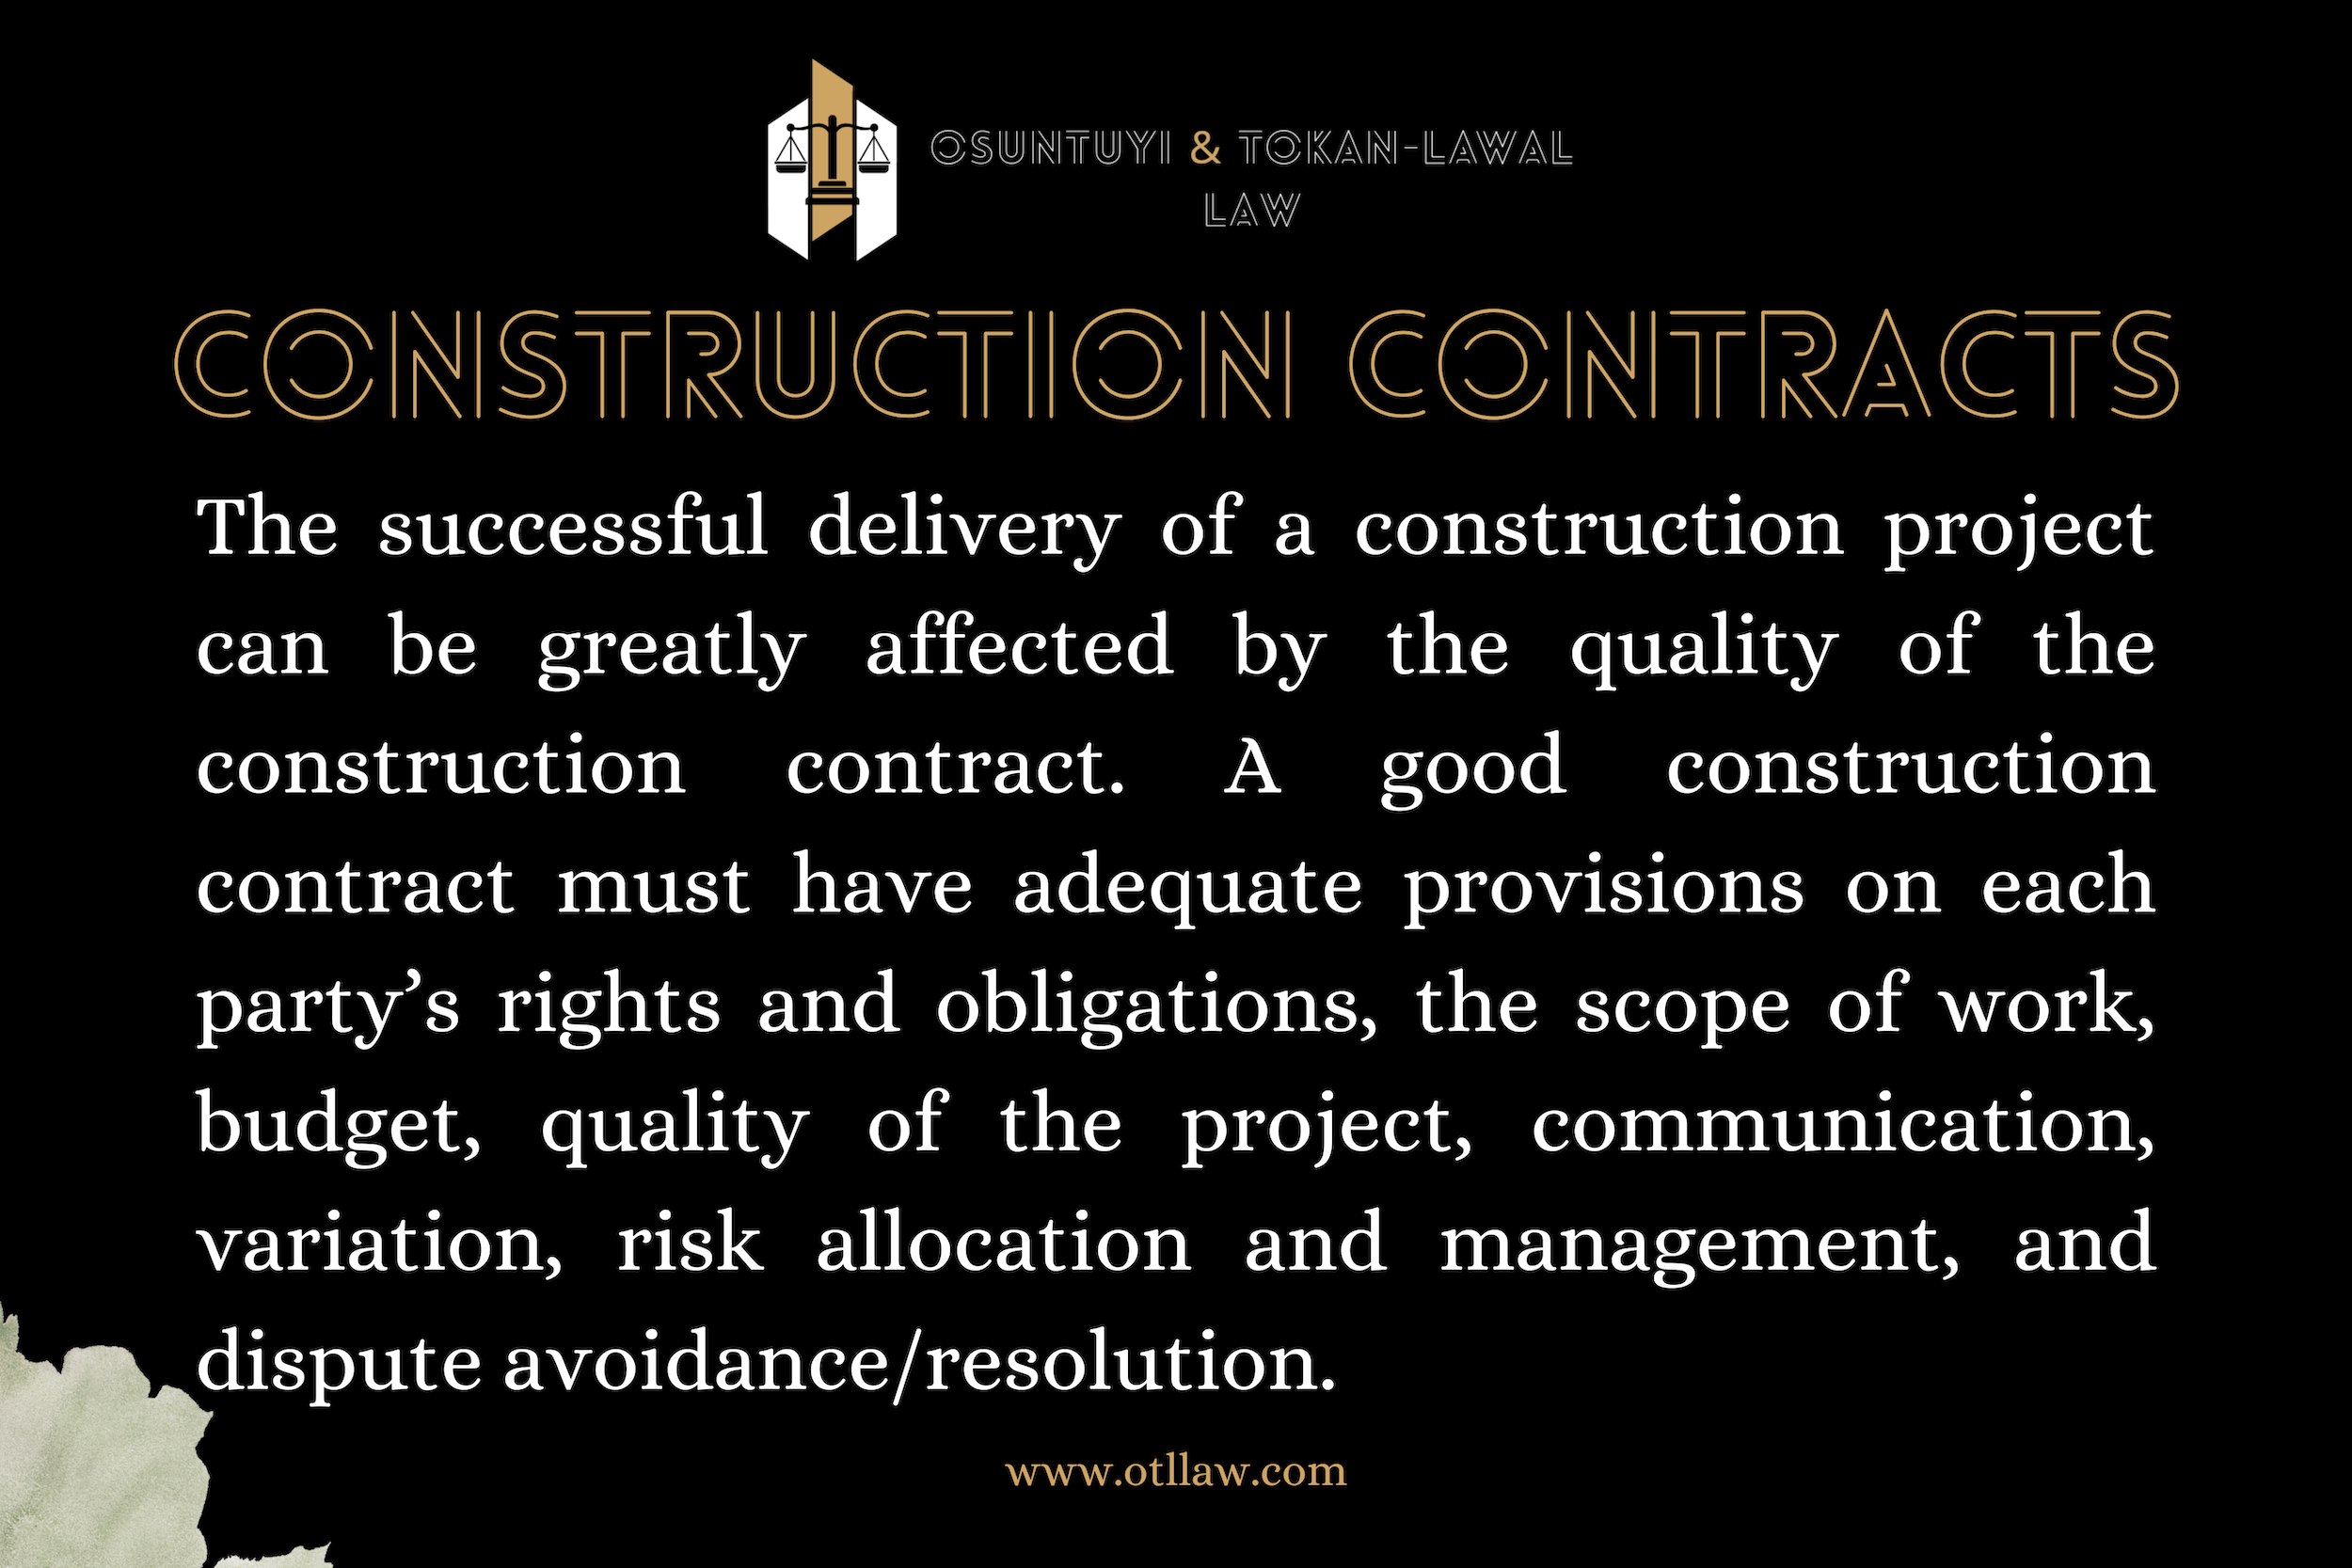 construction contracts as mechanisms to achieve successful projects. OTL Law.